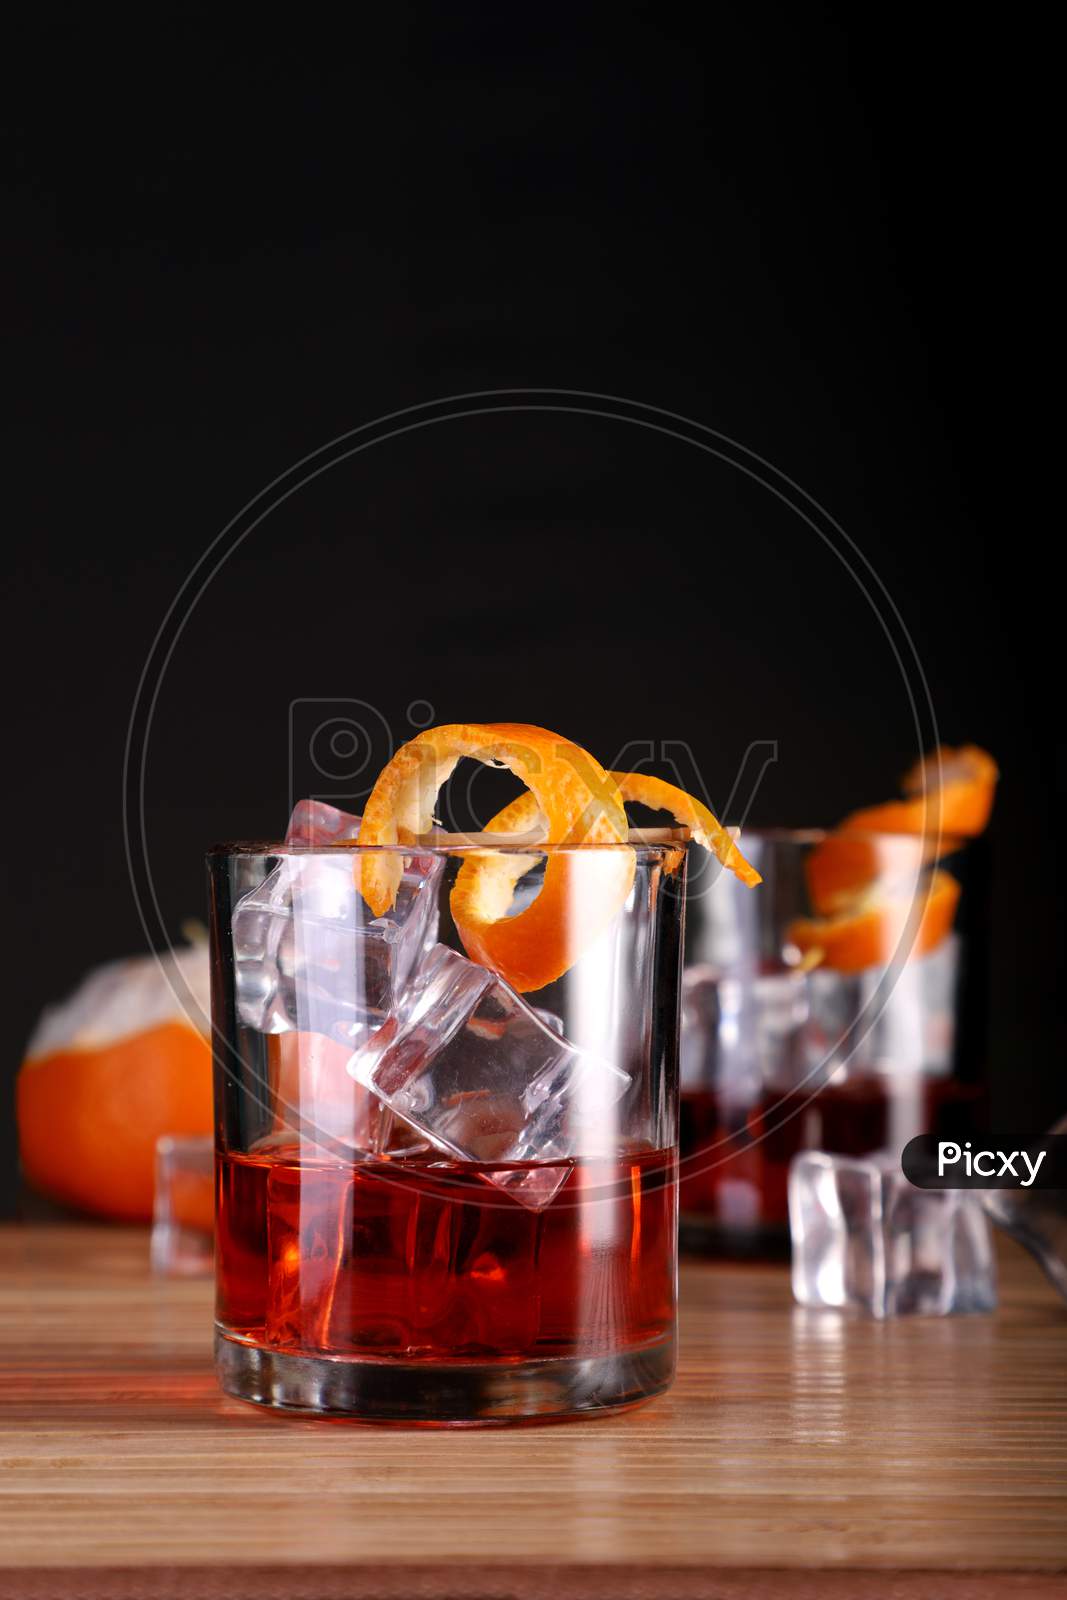 Chilled Alcohol Whisky / Rum Drink With Ice Cube And Orange Peel